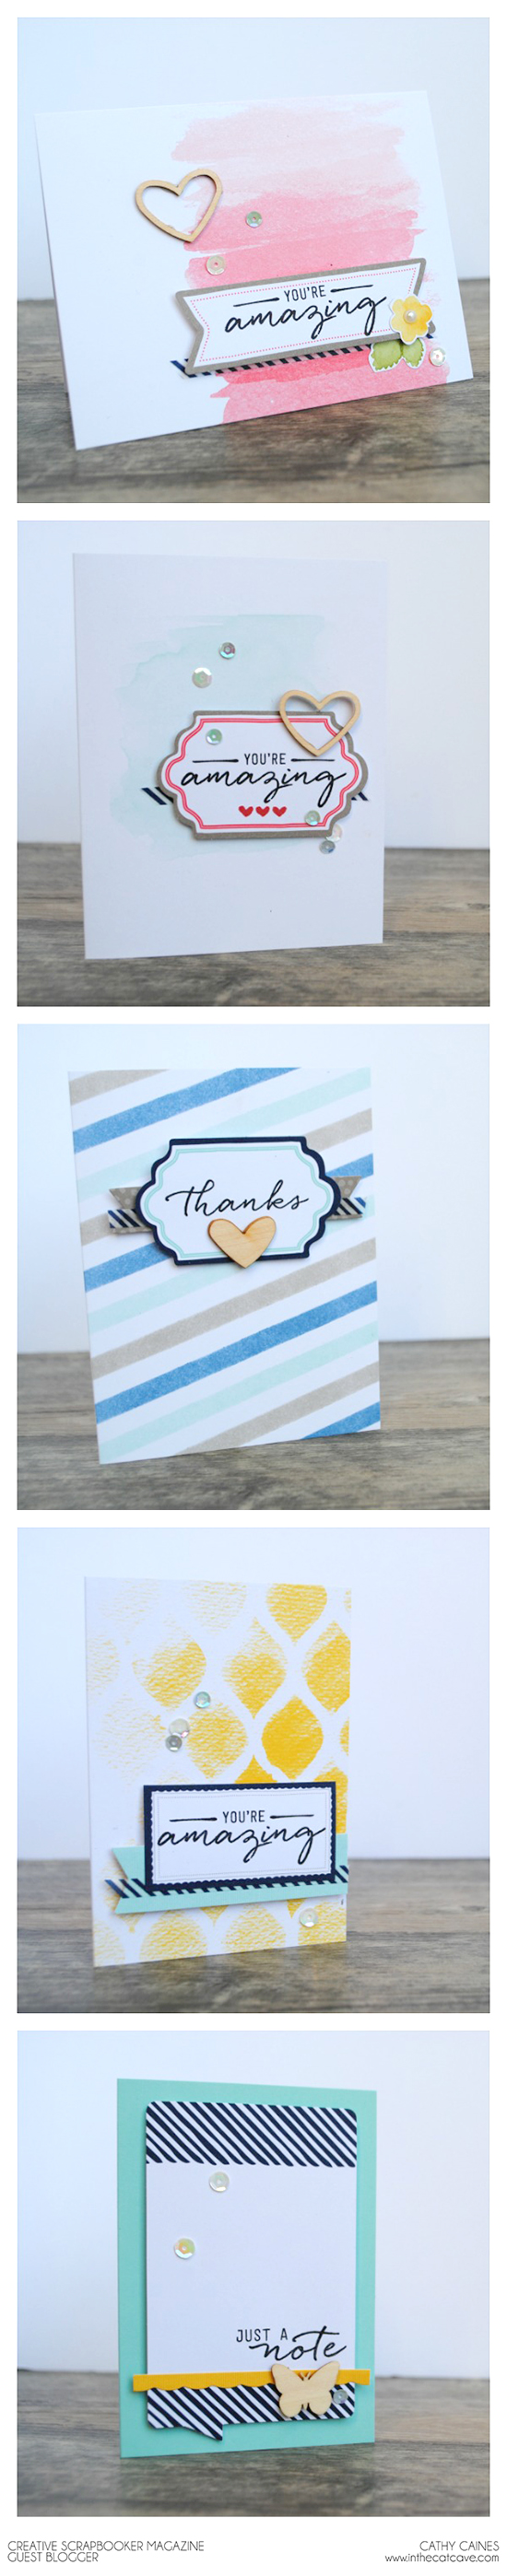 @csmscrapbooker @cathycaines @stampinup #scrapbooking #cards #stamping #giveaway